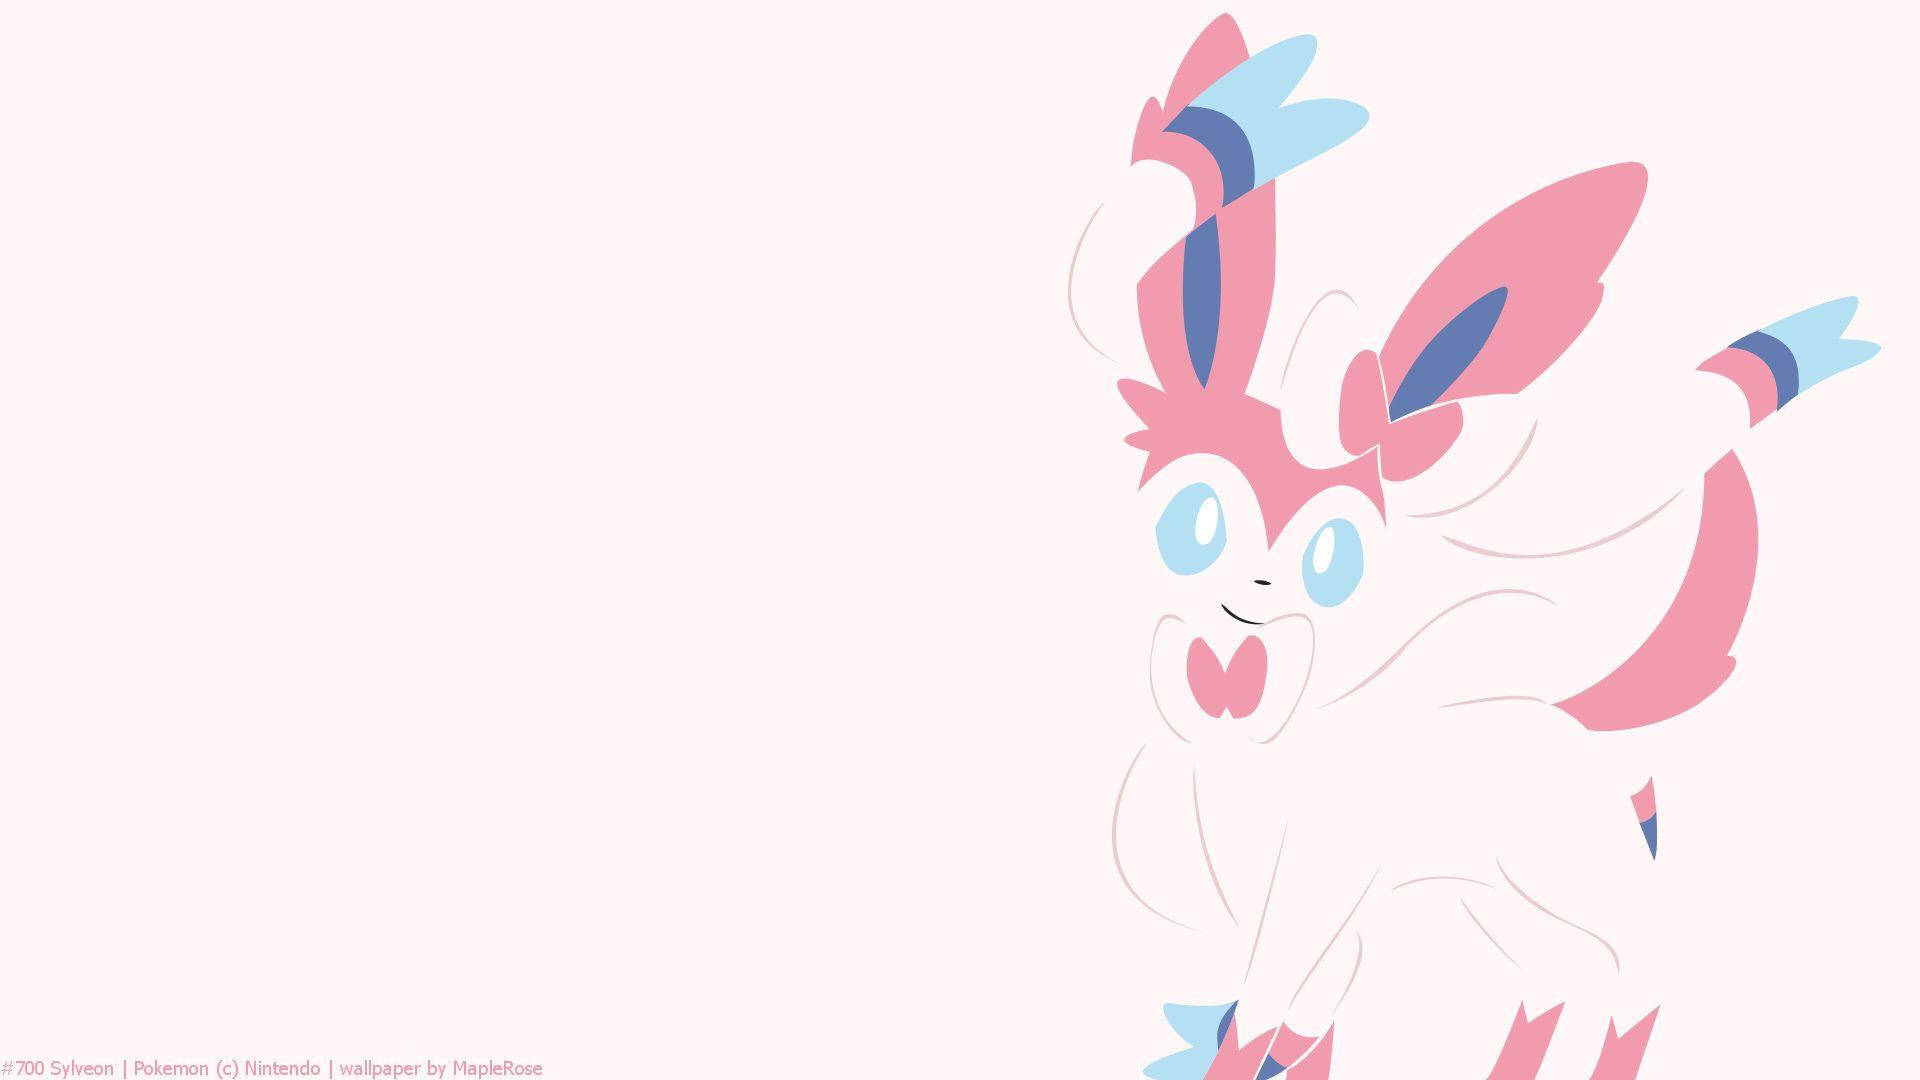 Top 999+ Sylveon Wallpapers Full HD, 4K✅Free to Use